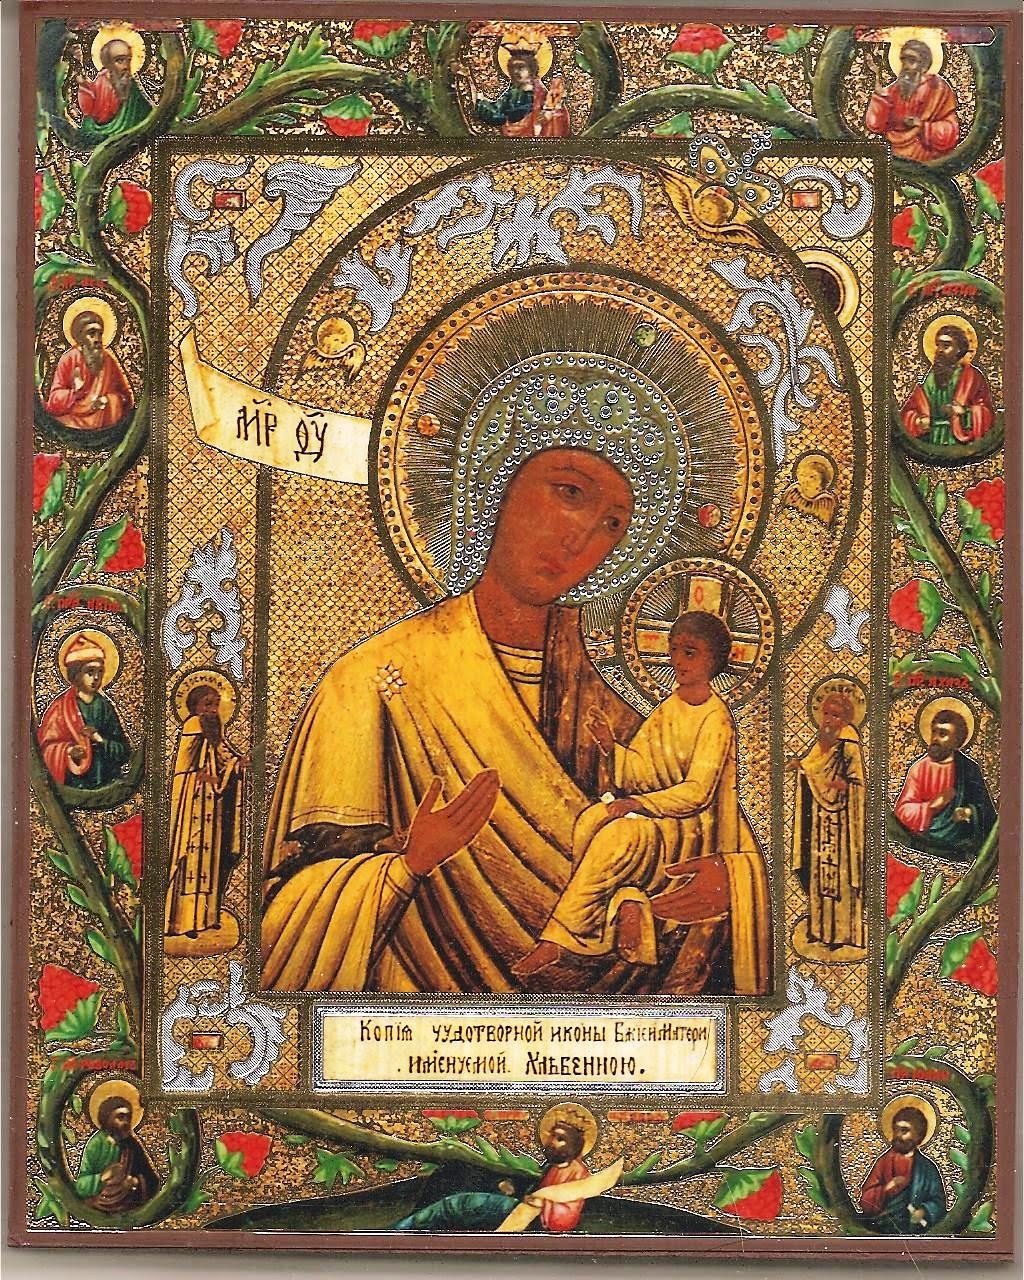   Our Lady of the Bread? (interesting to read) dans immagini sacre IconMadonnaoftheBreadRussian